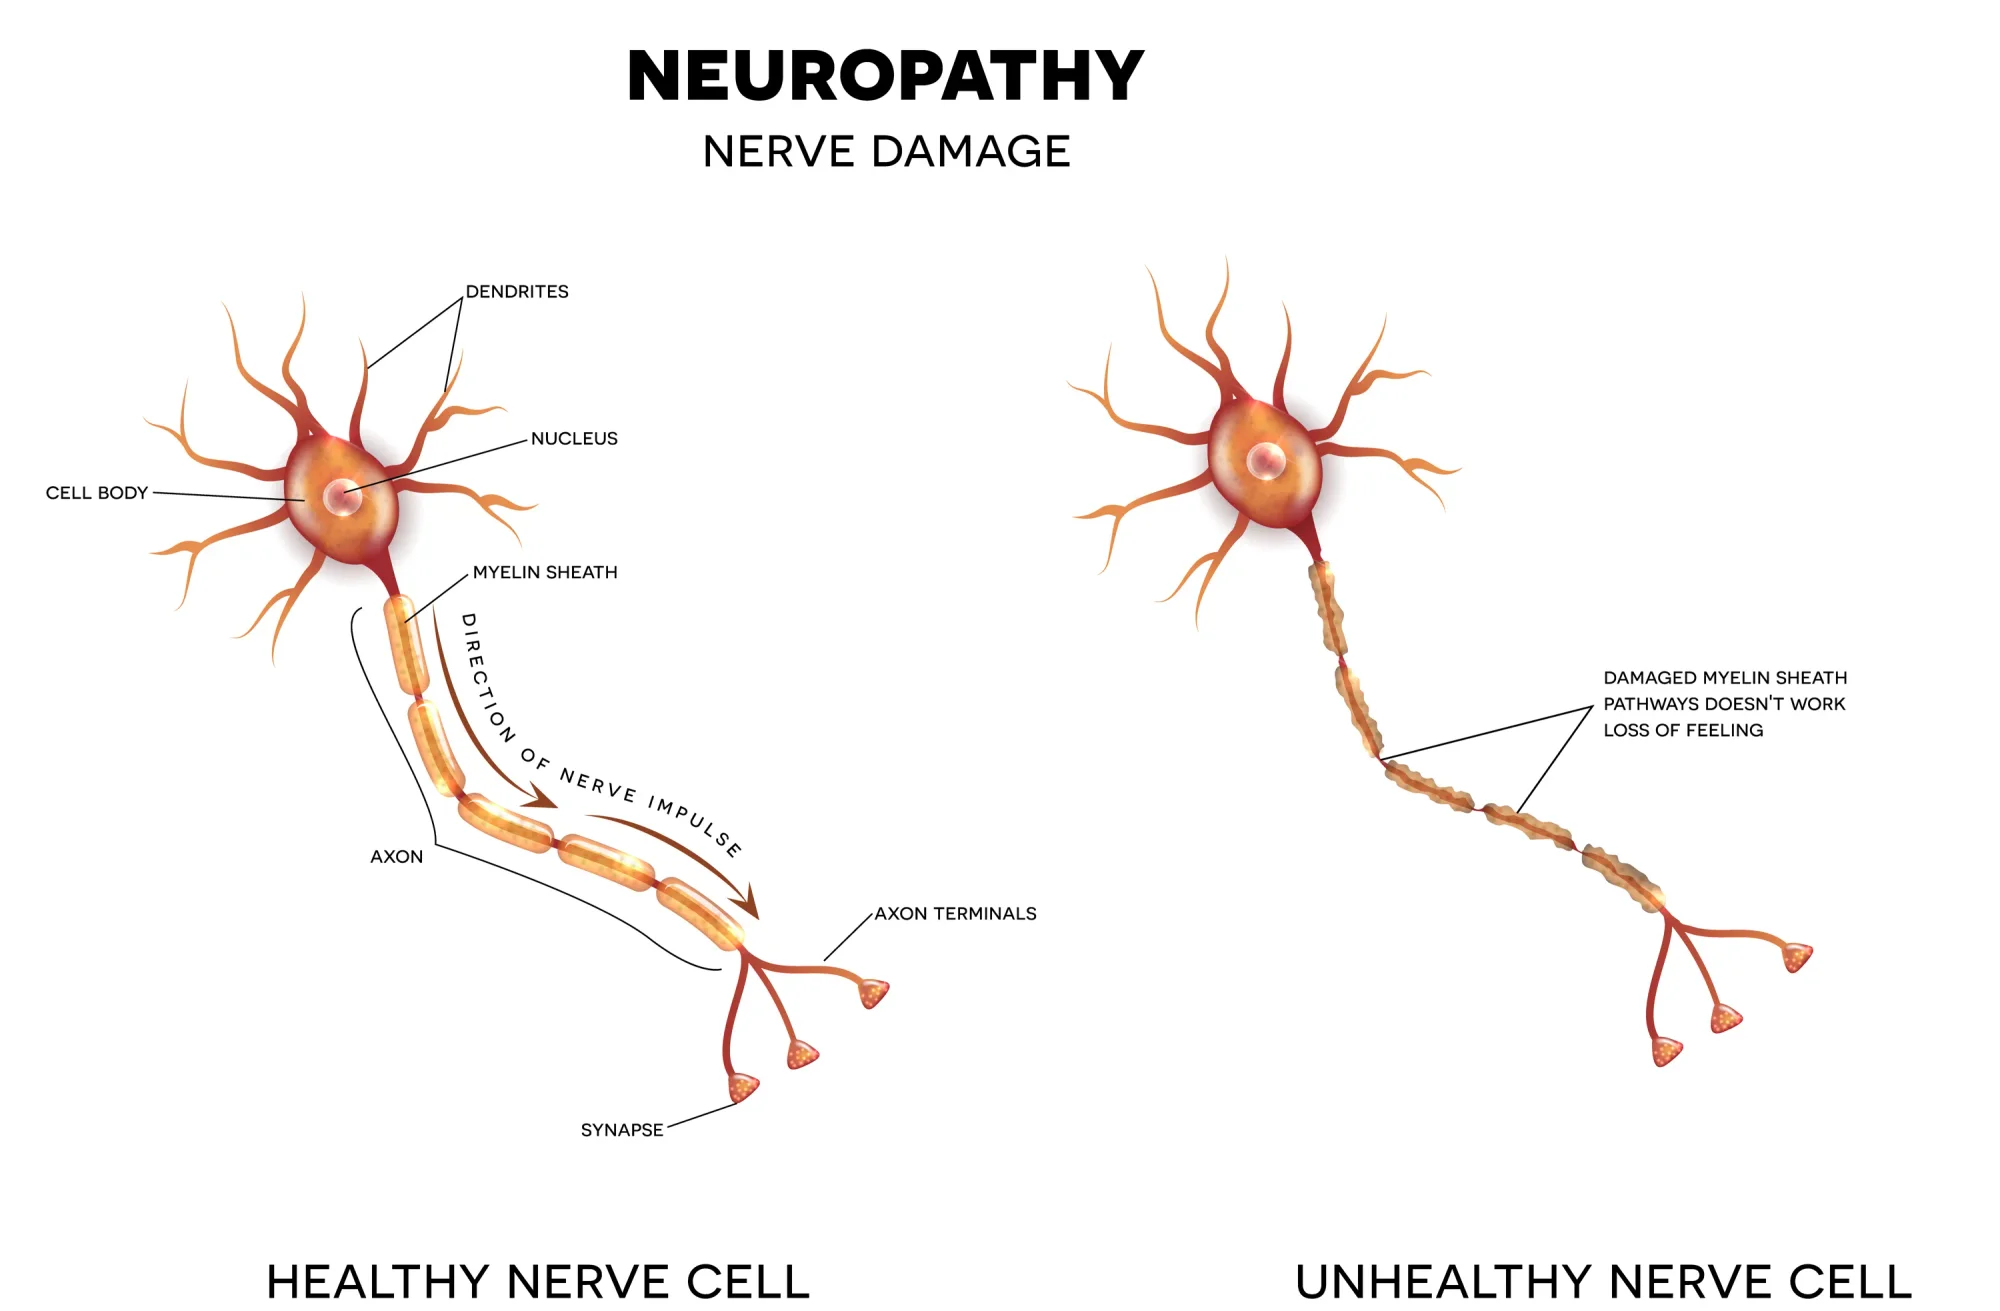 Animated graphic showing the difference between a healthy nerve cell and unhealthy nerve cell to describe neuropathy.